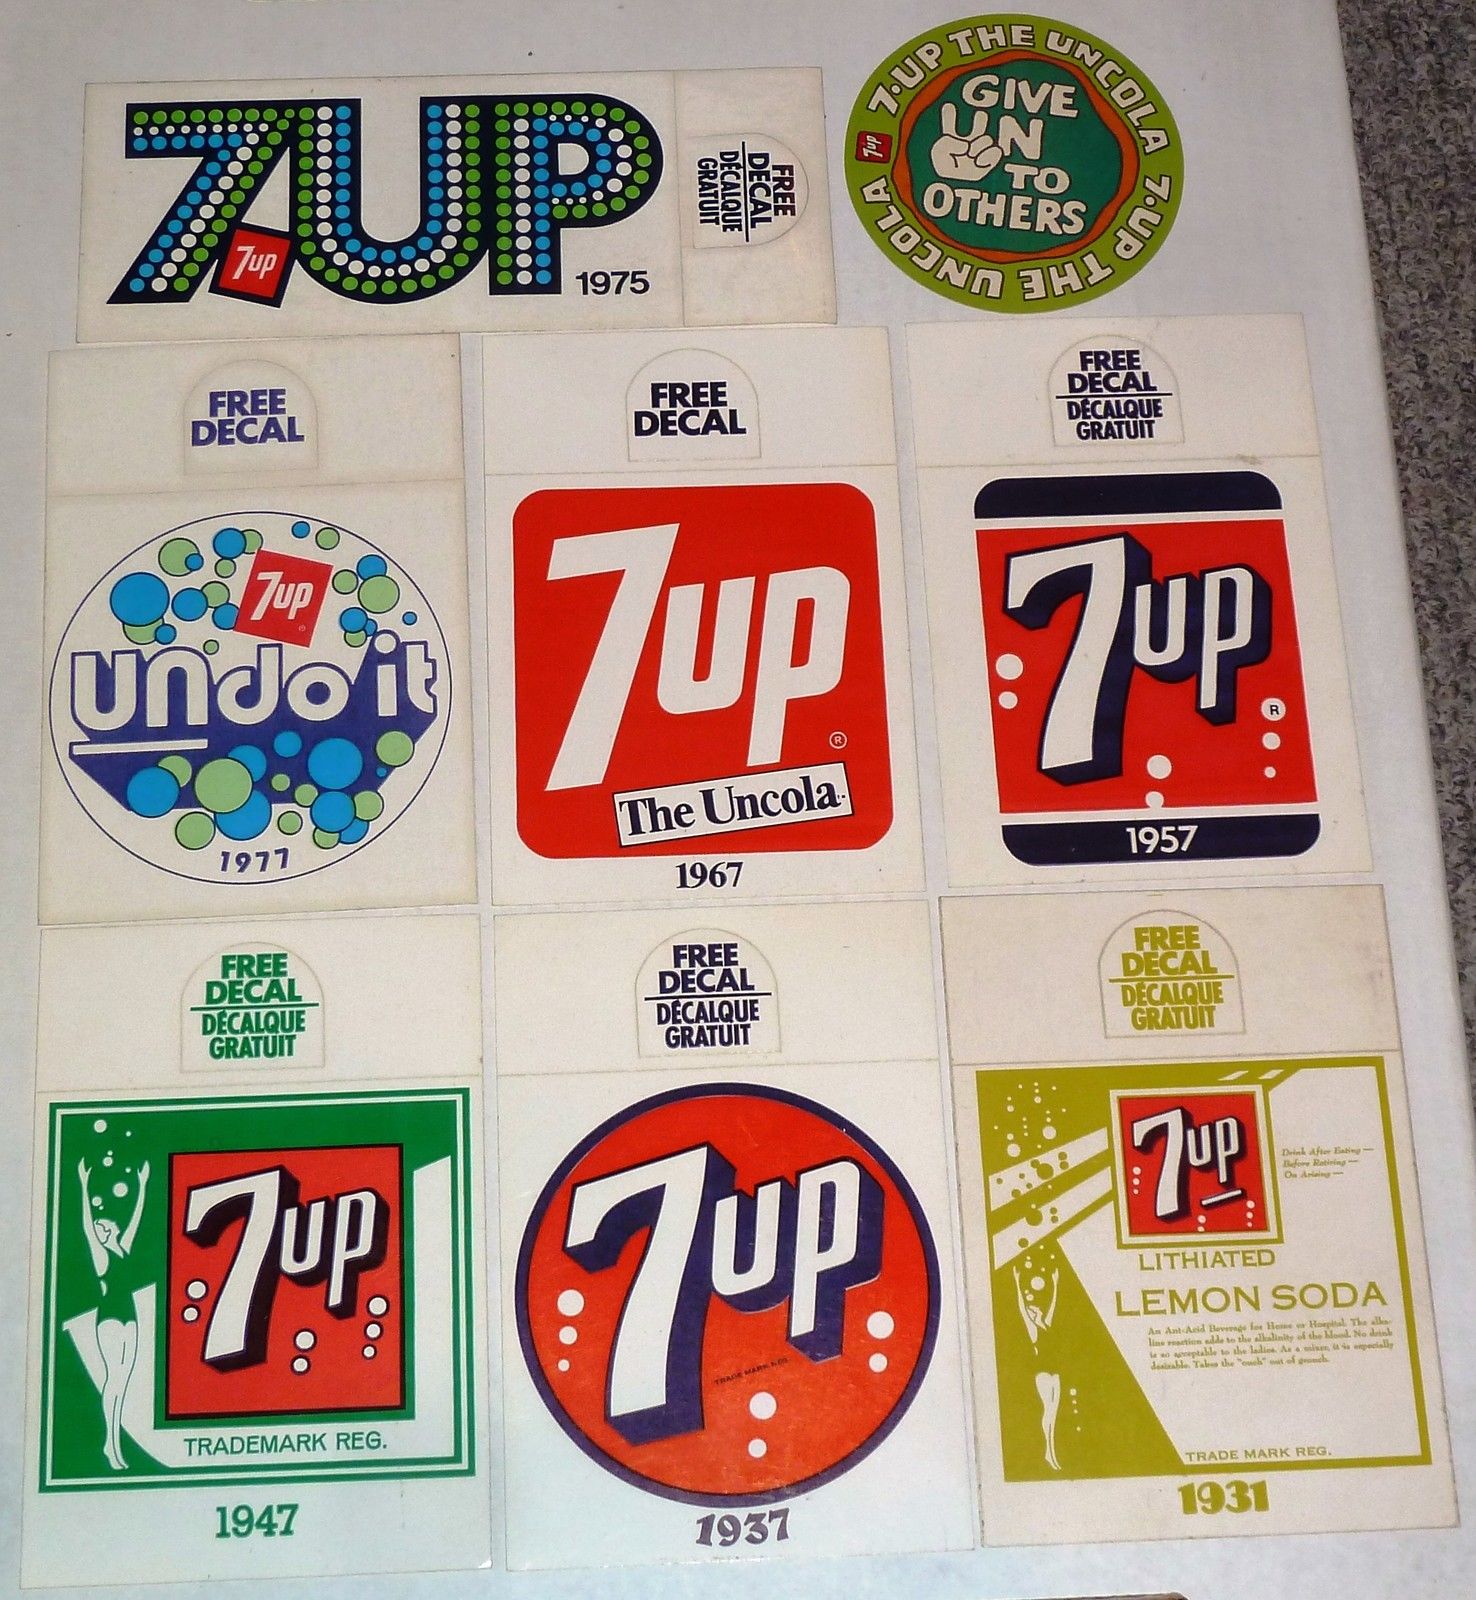 7up Decals Reproductions eBay April 2016 .jpg